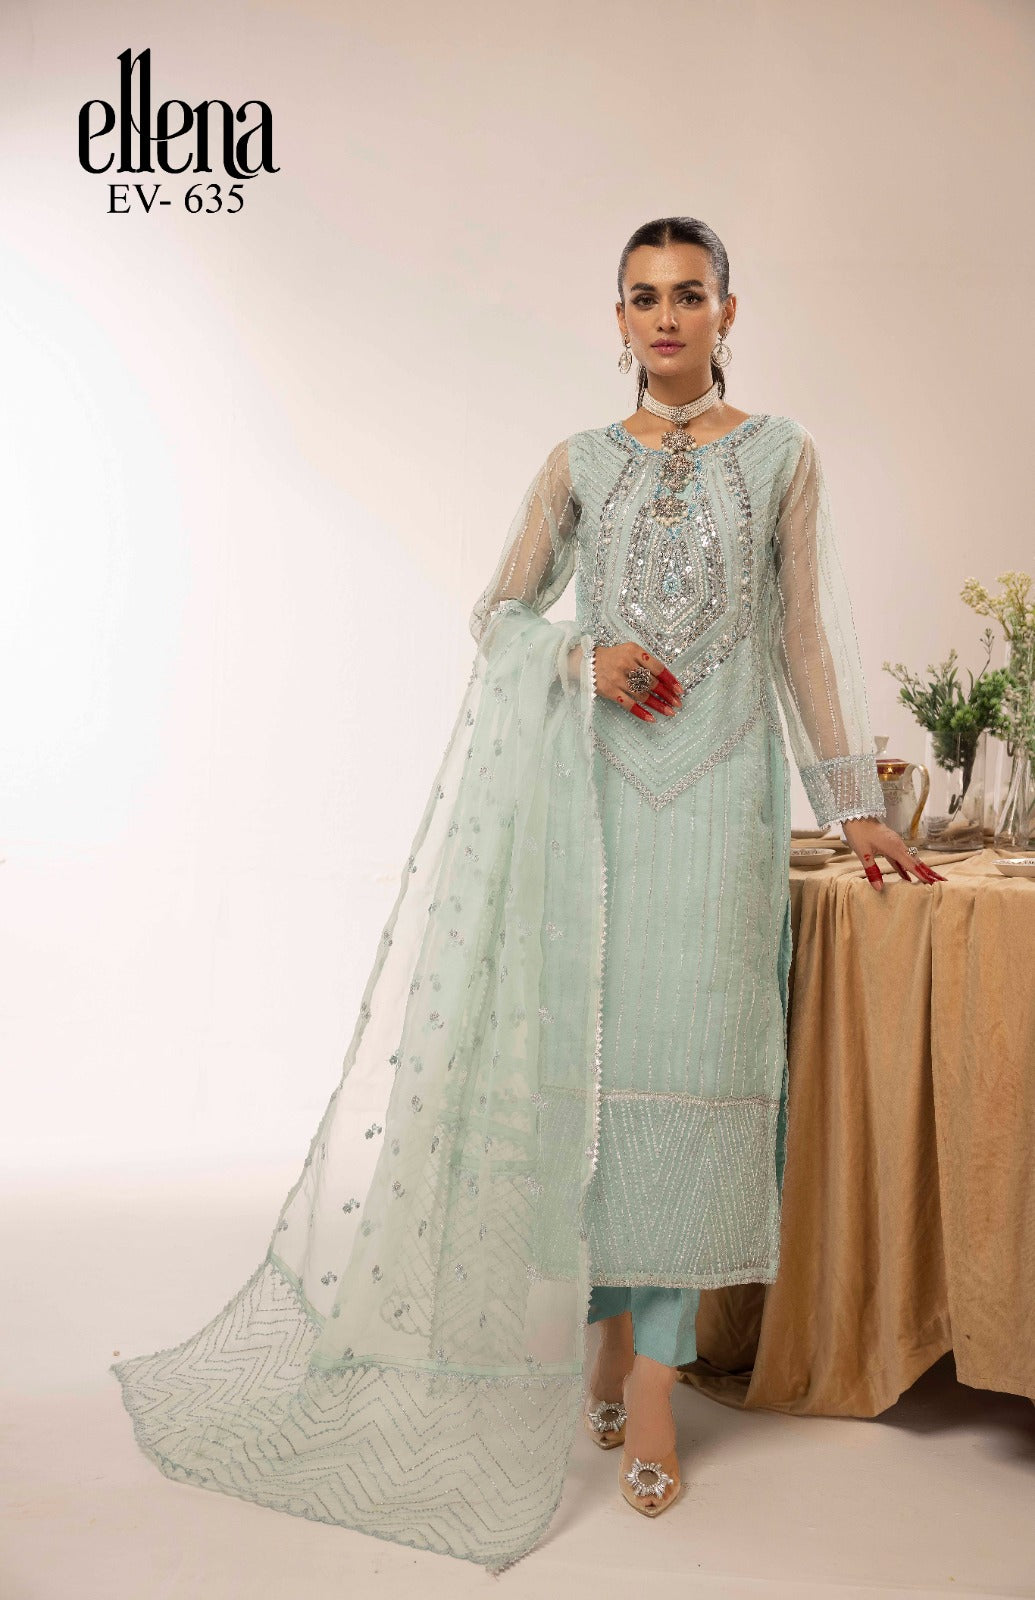 Elena 3-PC Stitched Embroidered Suit EV-635